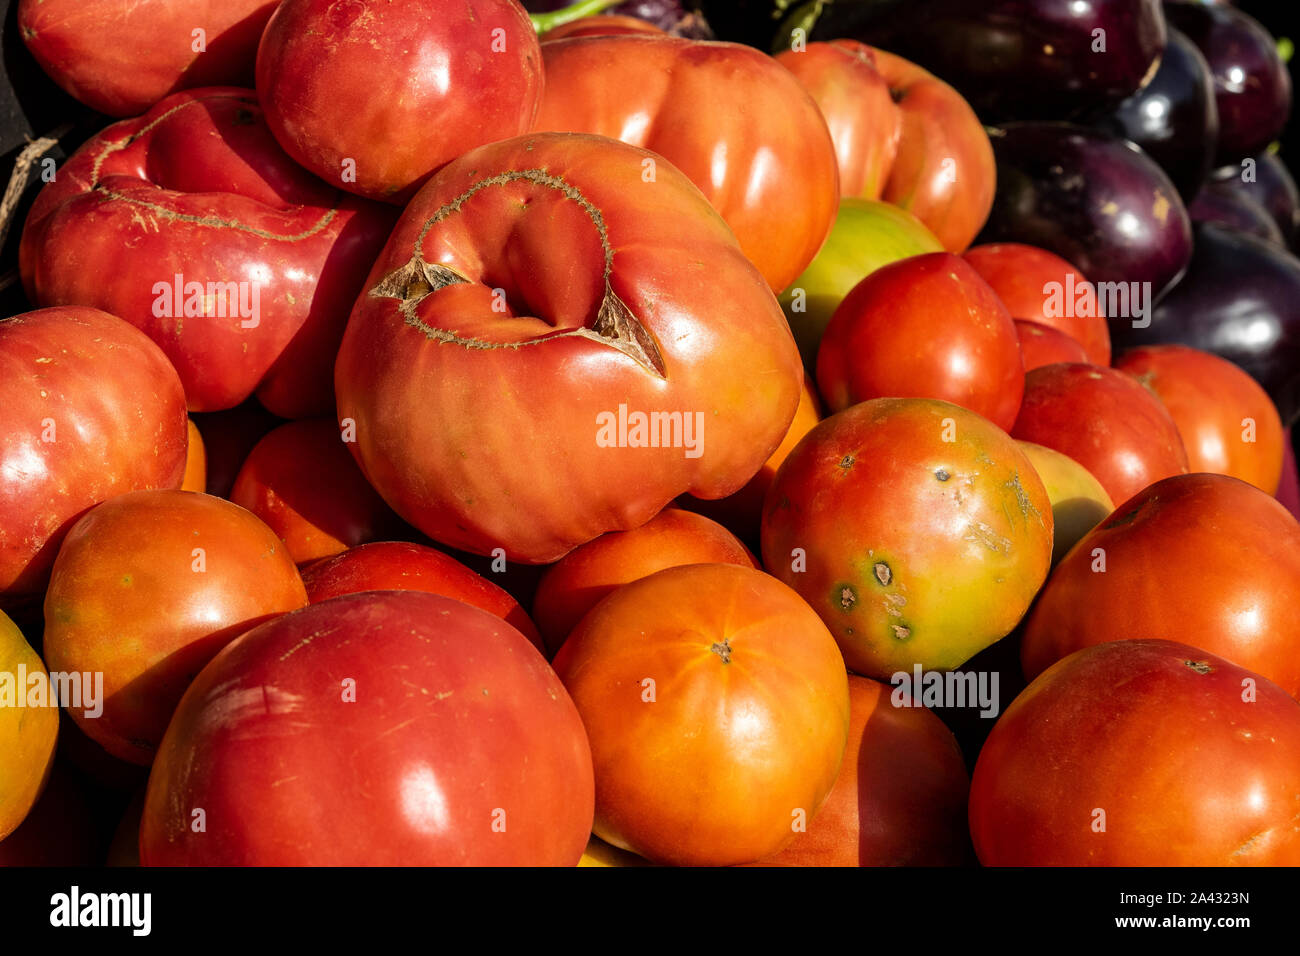 Tomatoes in the local organic products market, León, Spain Stock Photo